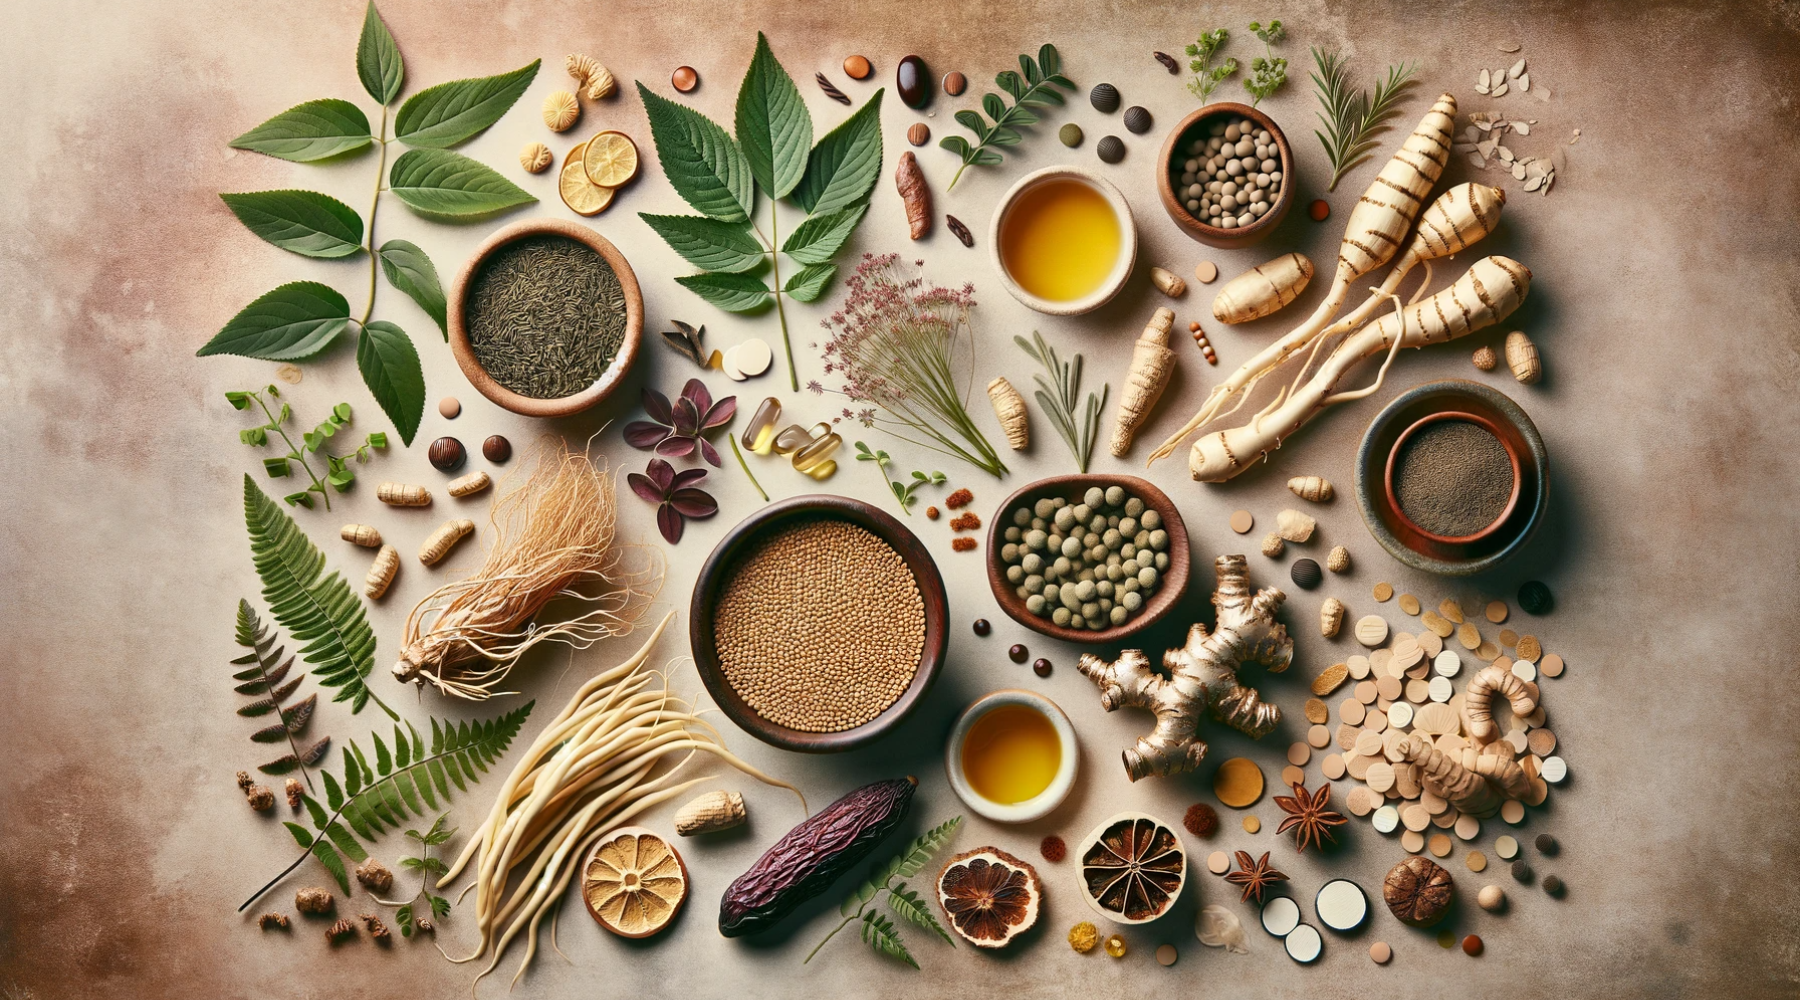 Herbal Supplements and Natural Remedies